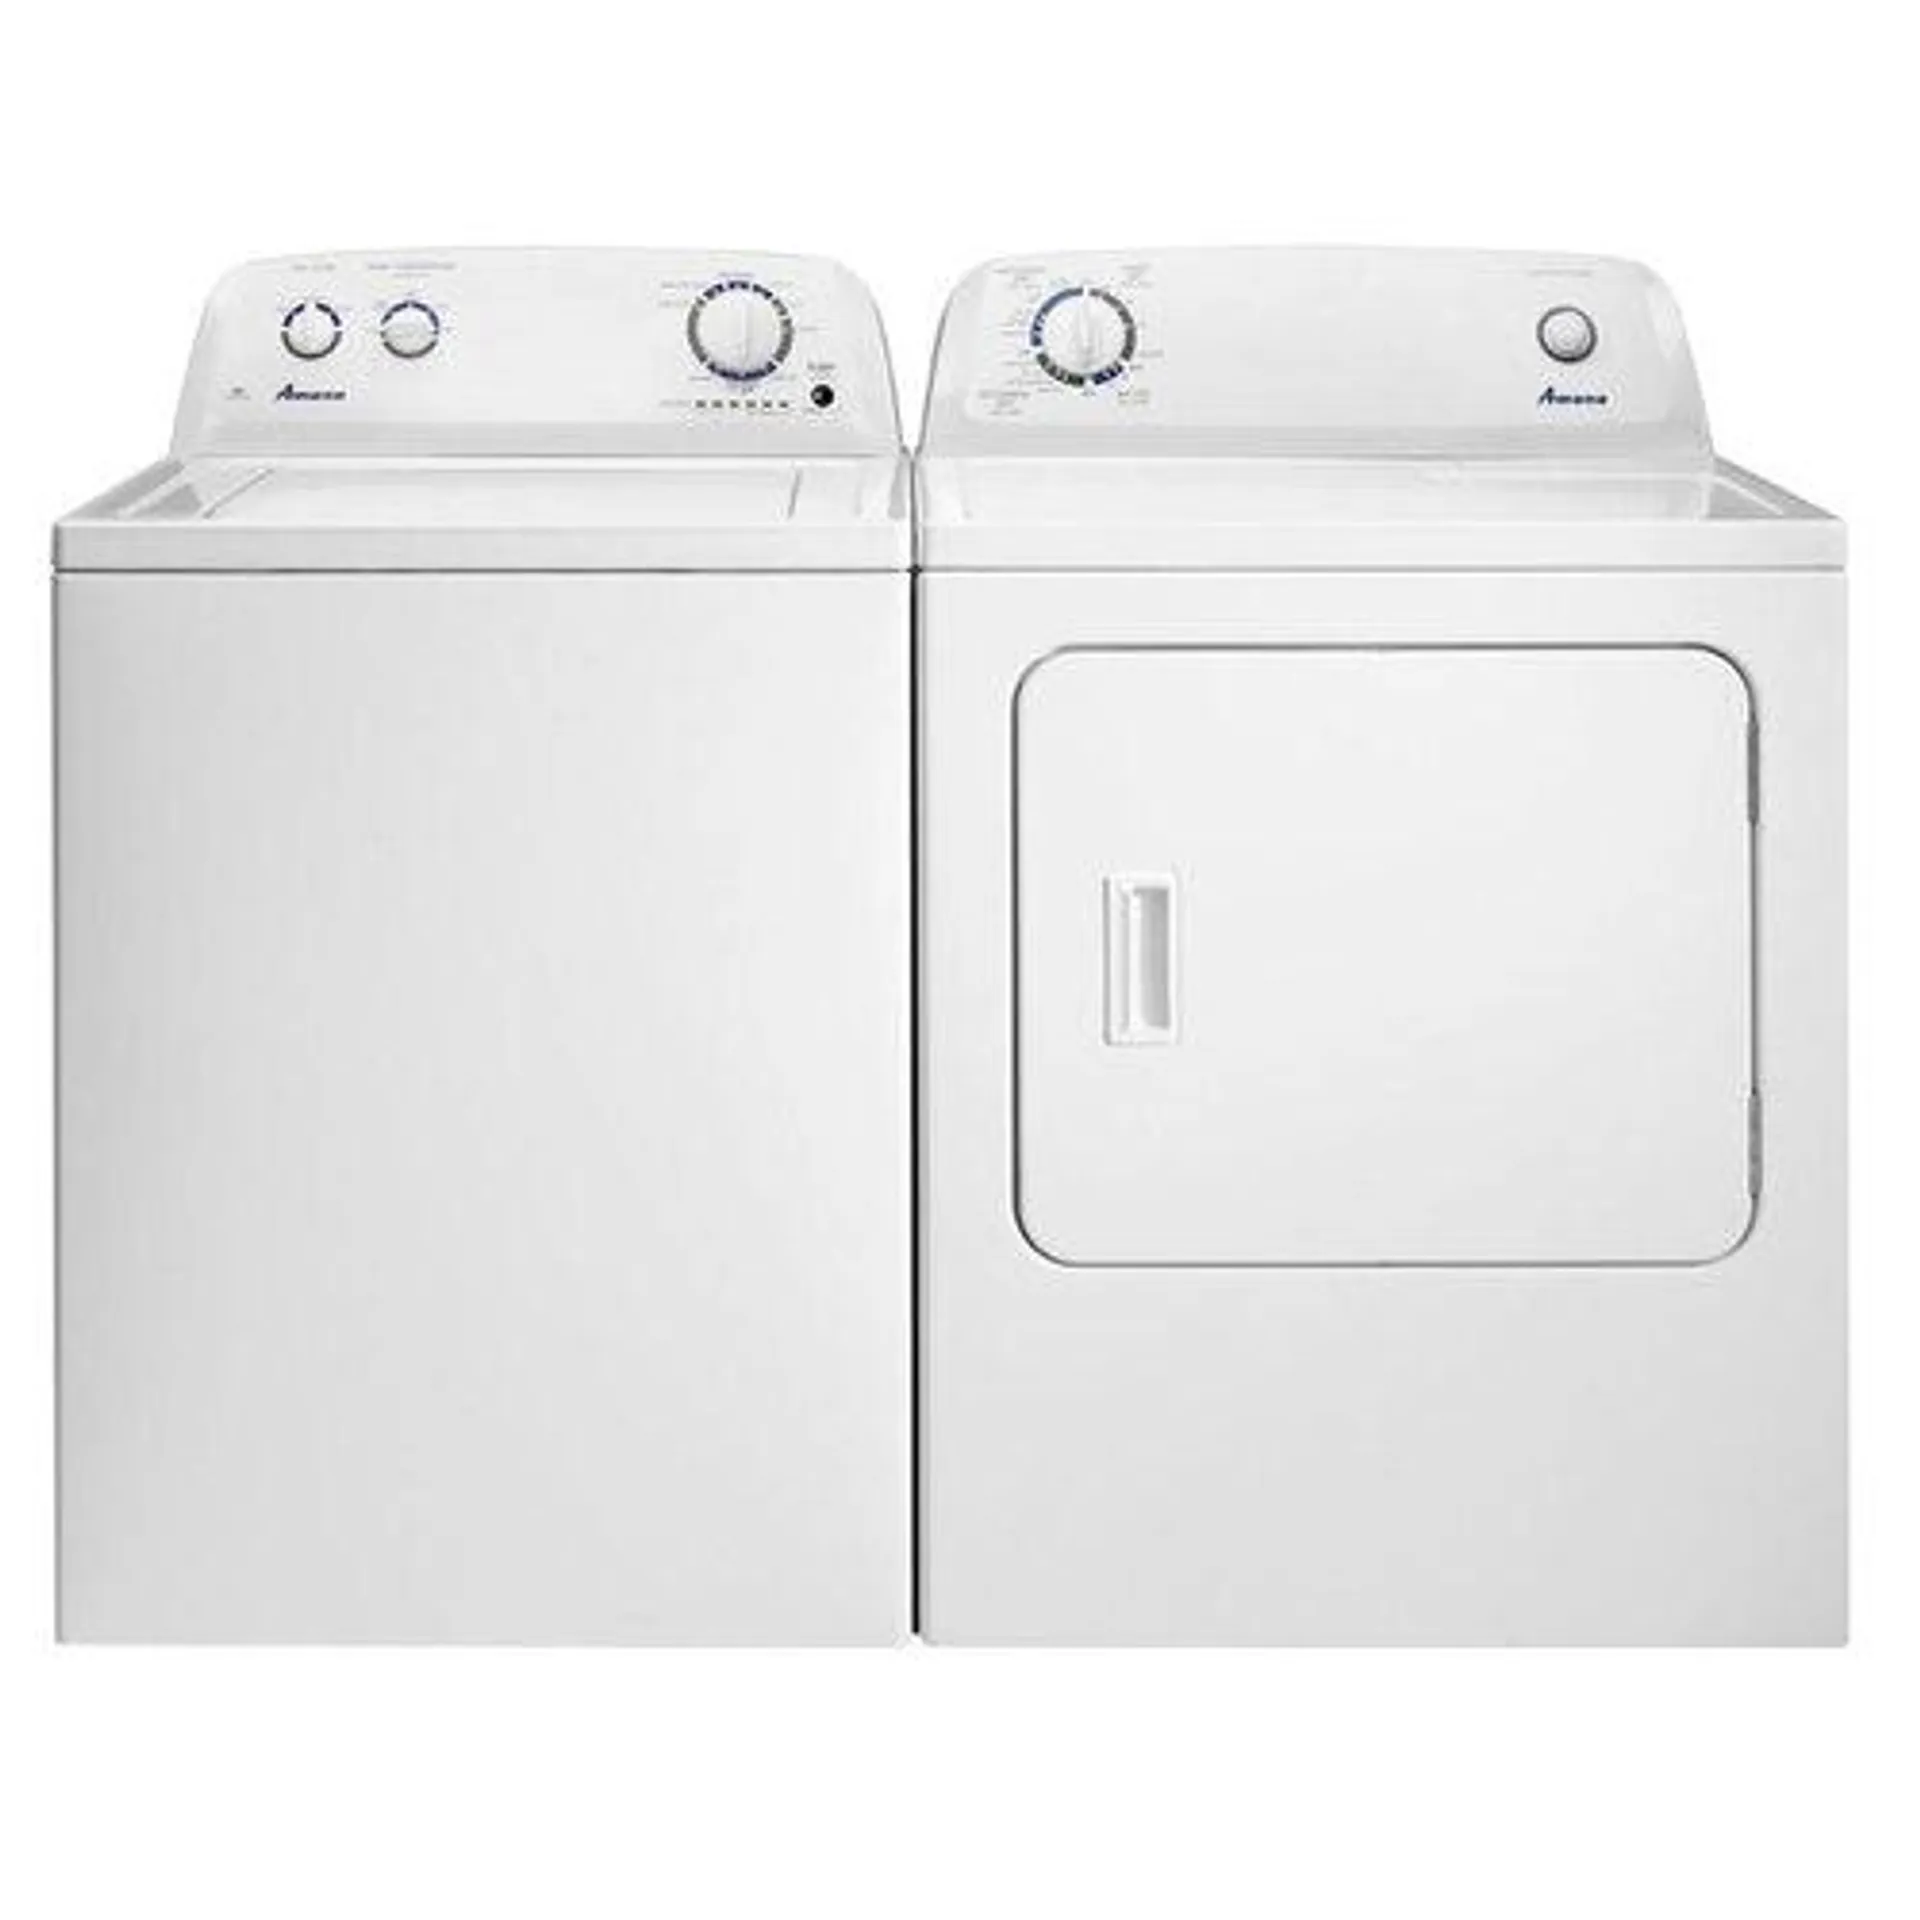 27” 3.5 CuFt Top Load Washer and 6.5 CuFt Electric Dryer